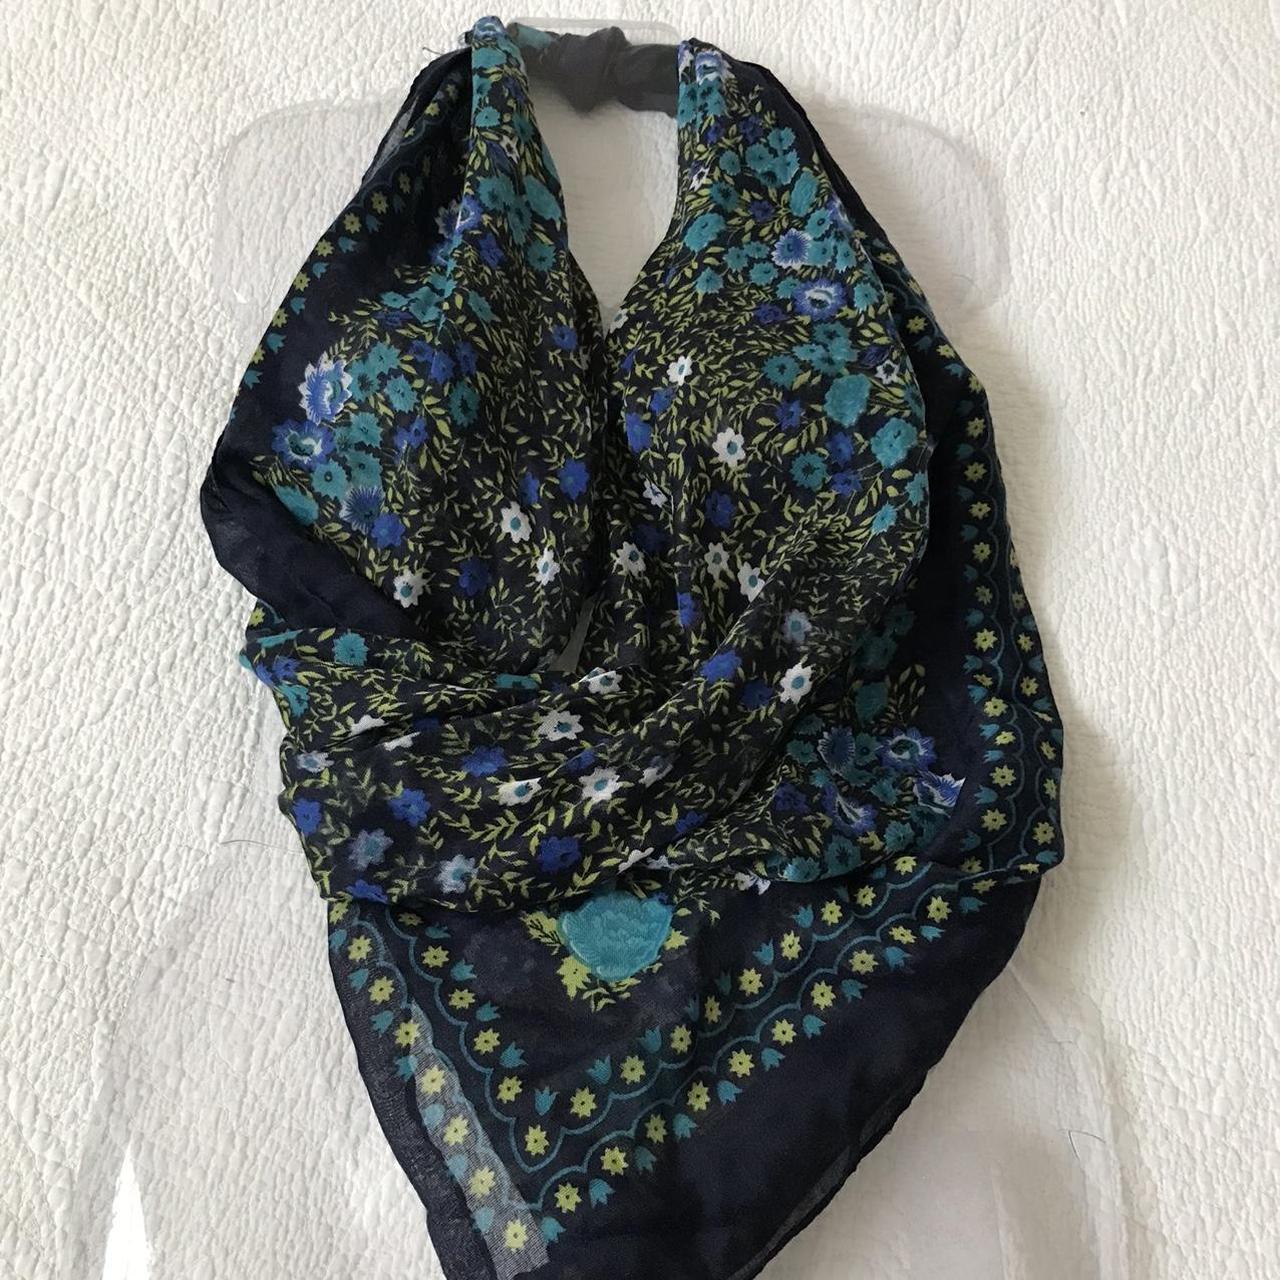 Accessorize Women's Navy and Blue Scarf-wraps